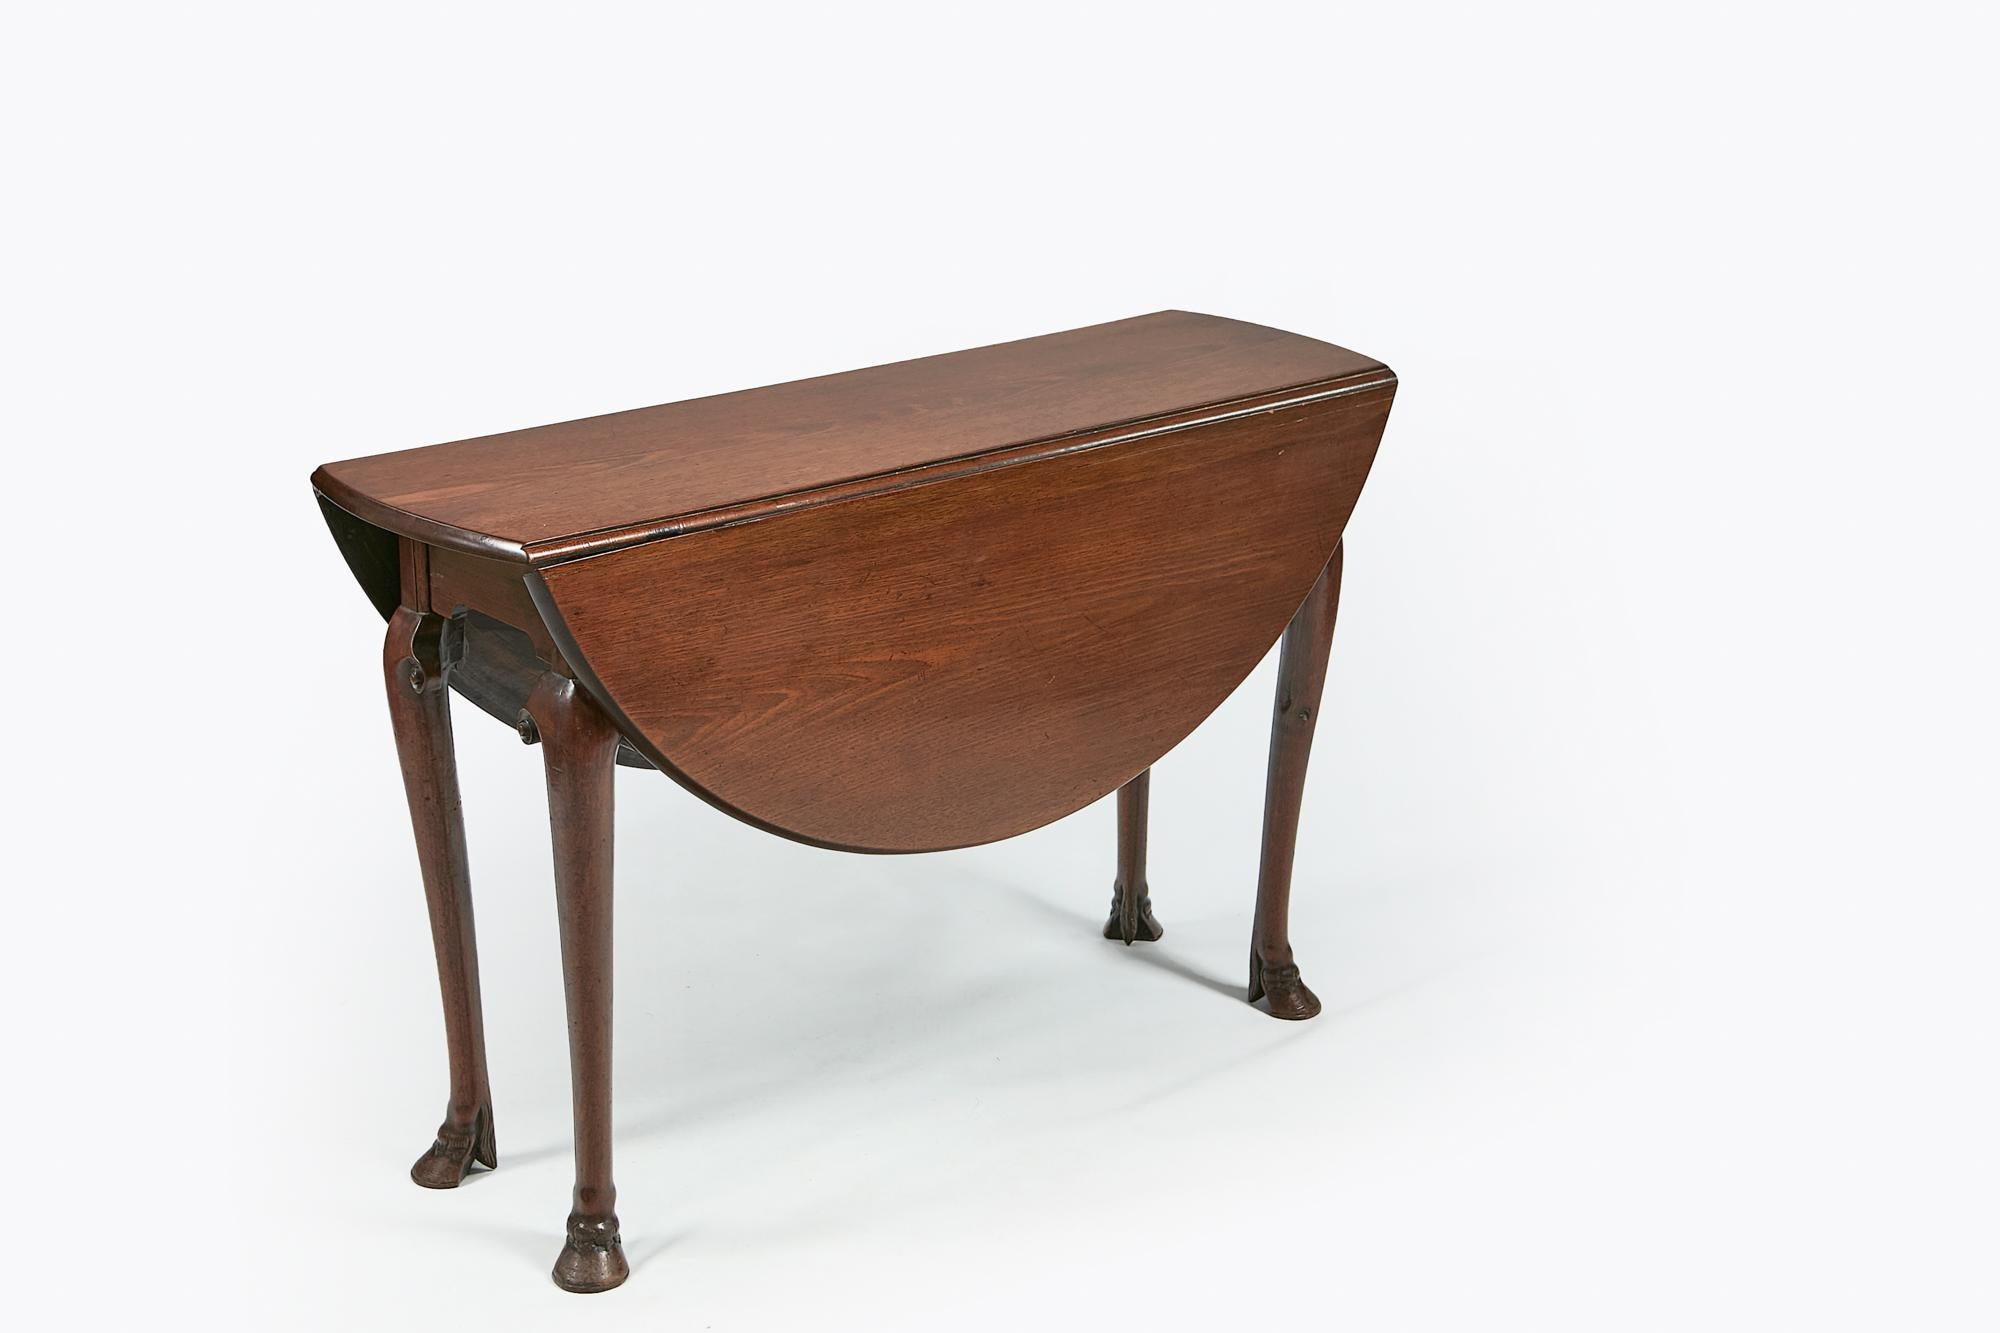 18th century George II Irish mahogany drop-leaf table, the moulded top of oval form incorporating twin hinged leaves, raised above moulded frieze supported on cabriole leg with carved scroll terminals terminating in hoof foot, circa 1750.